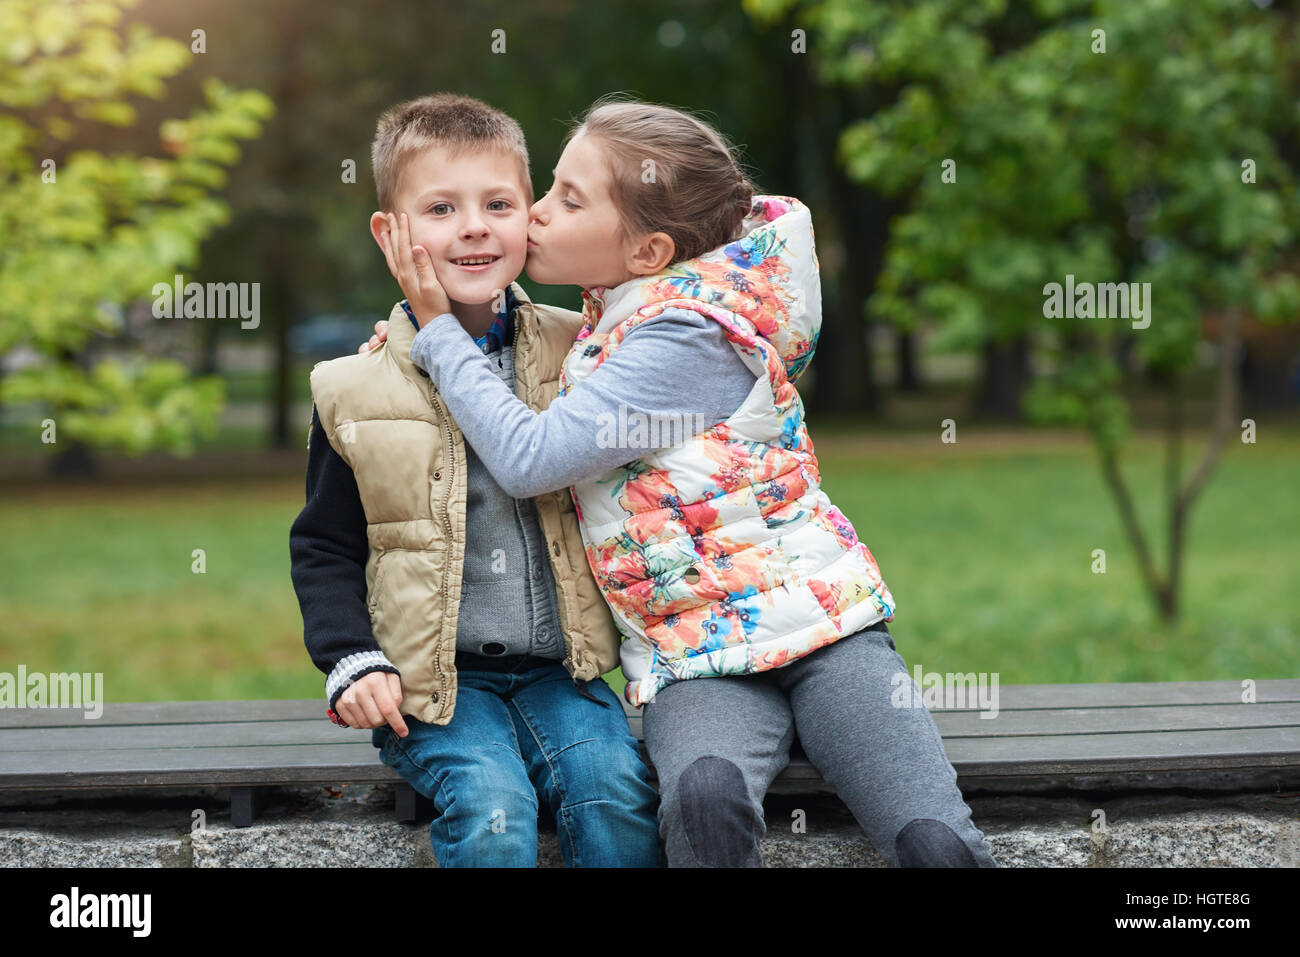 Giving her little brother a kiss outside Stock Photo